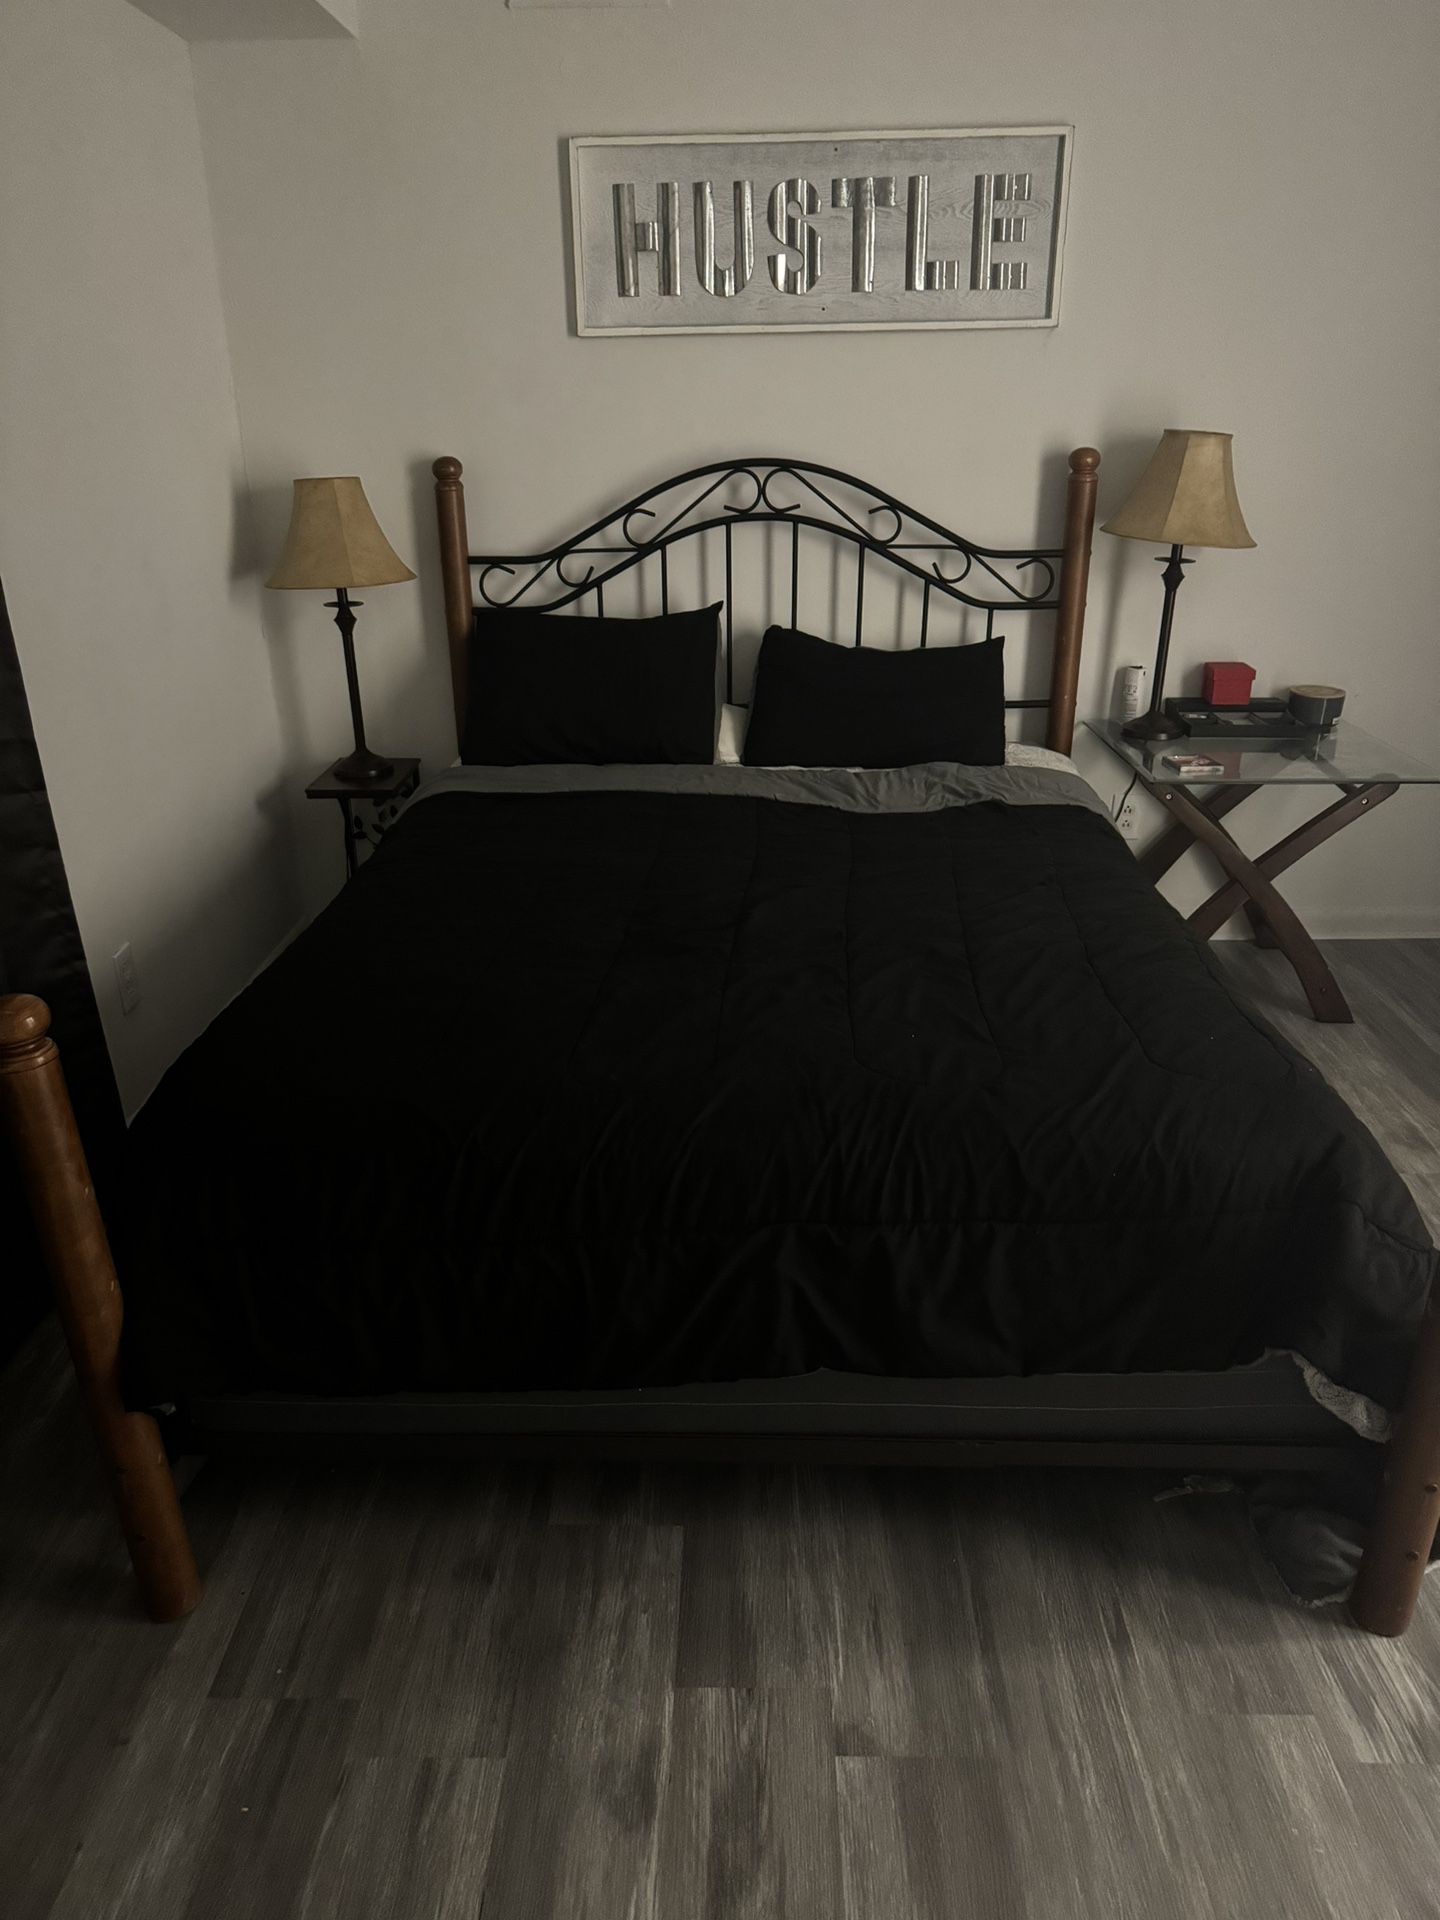 Queen Bed Frame, Mattress, And Matching Tv Stand